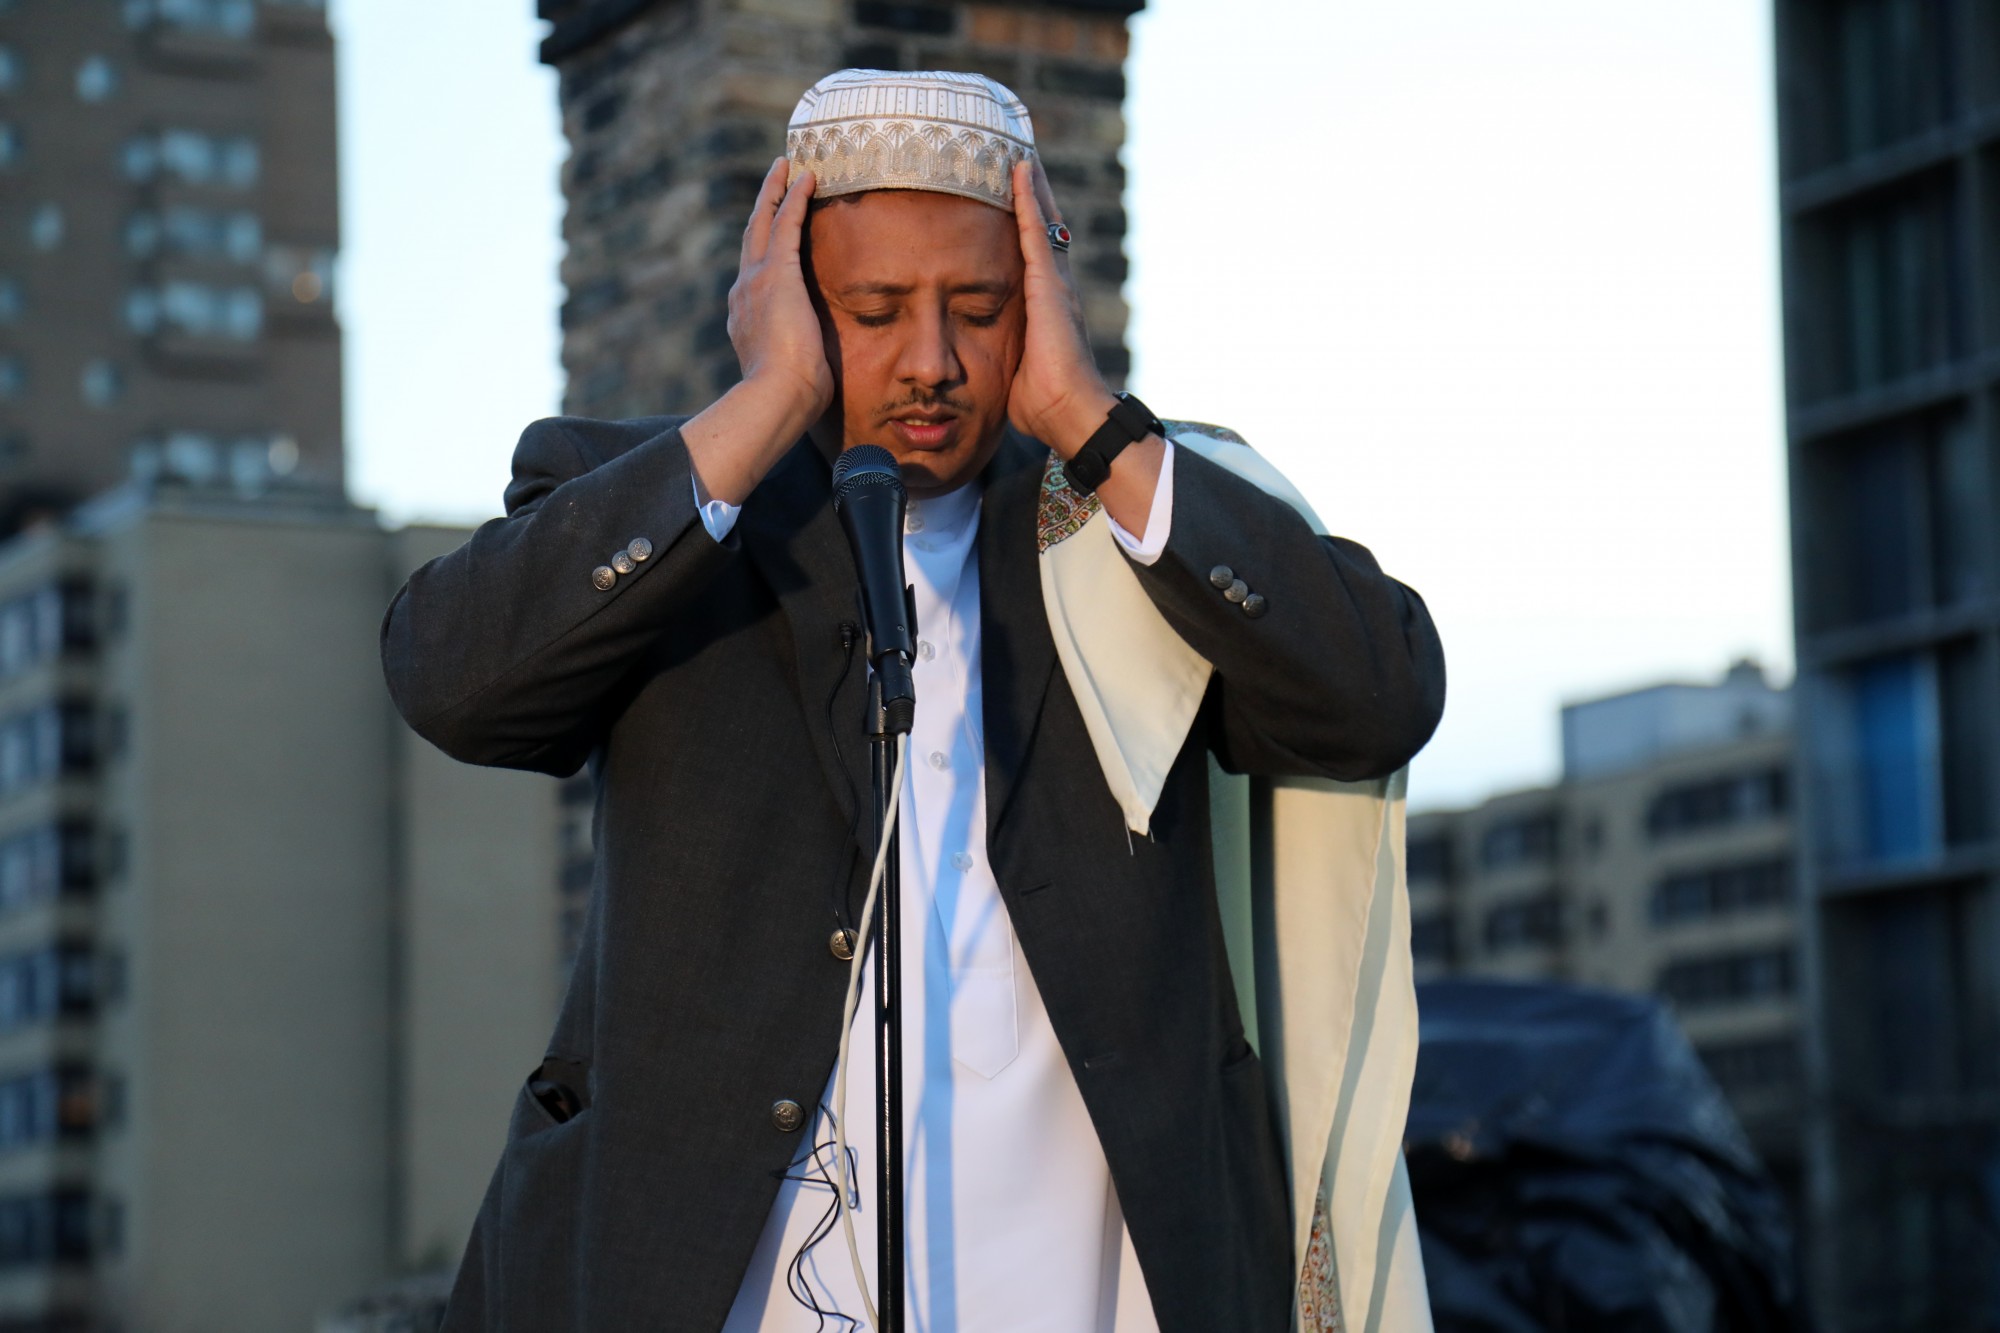 Ahmed Jamal, the first muezzin to give the adhan from the roof of Dar Al-Hijra Mosque in Cedar-Riverside on Thursday, April 23. Courtesy of Abdirahman Mukhtar.
